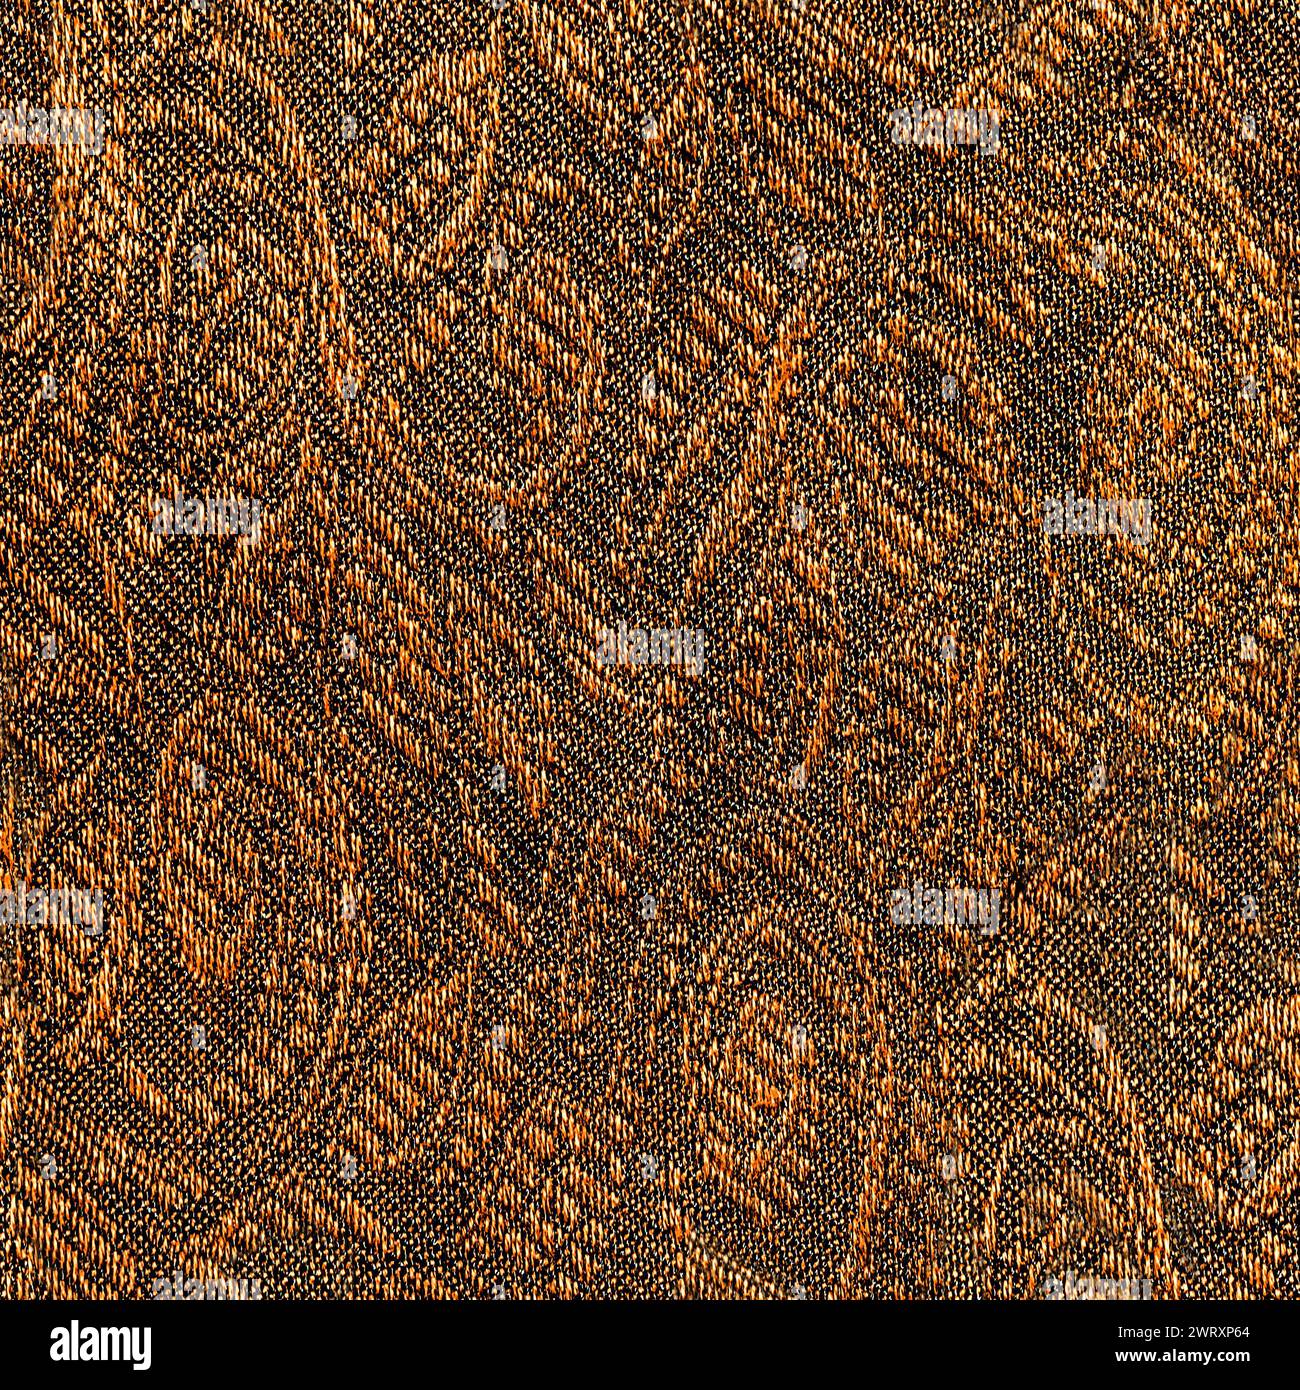 Seamless texture photo of dark golden brown floral patterned cotton material. Stock Photo